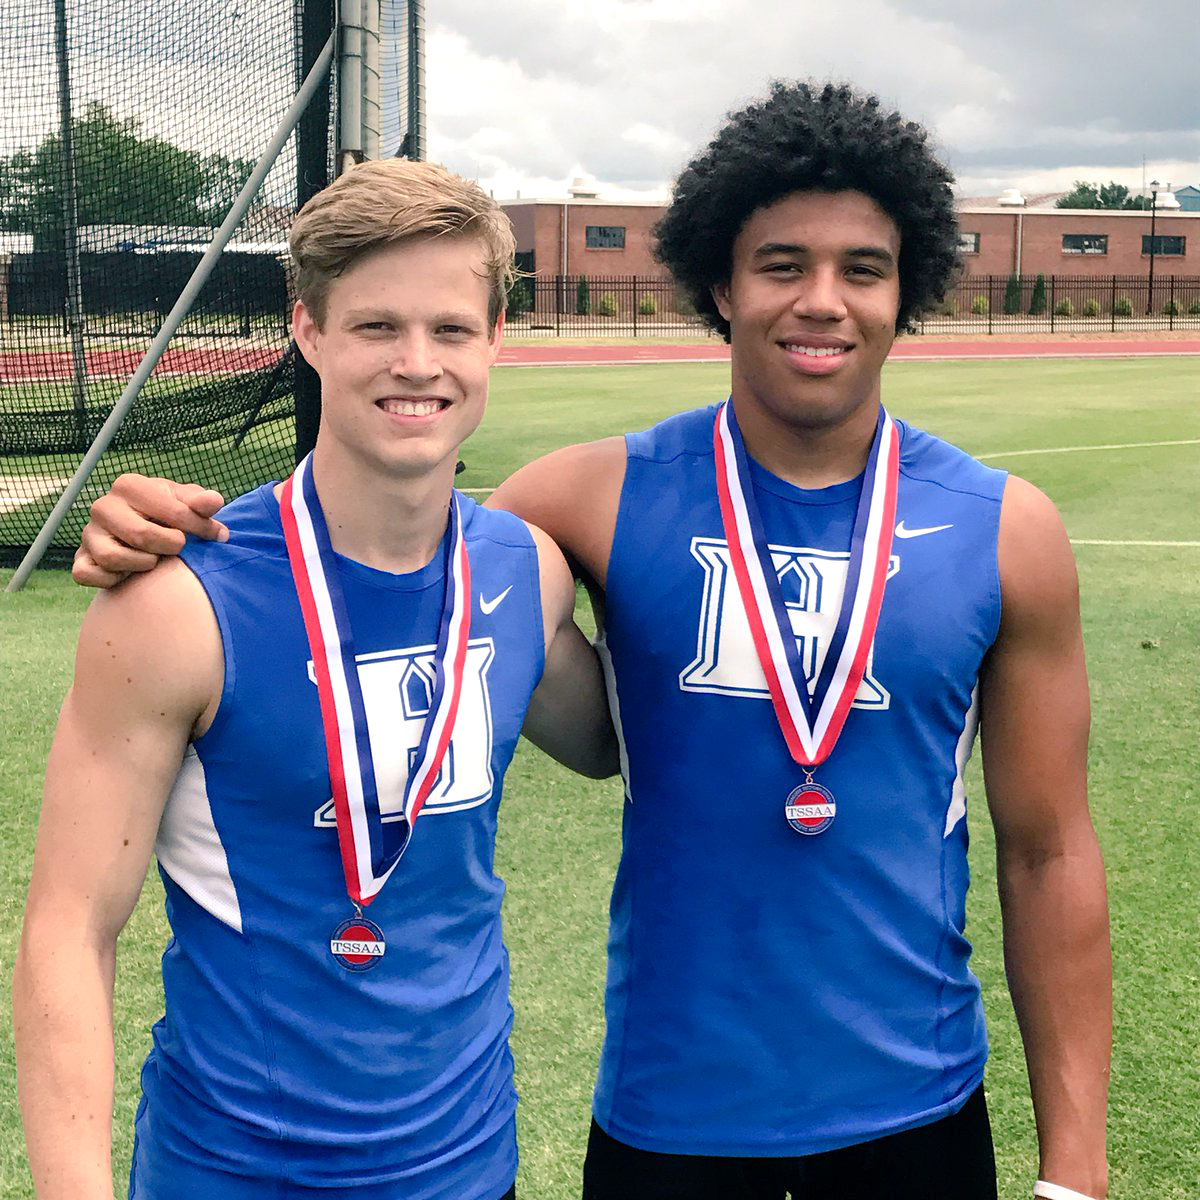 Congratulations to Ty Kimberlin and James Townsdin. They finished 3rd and 8th respectively in the decathlon at the TSSAA state championships!